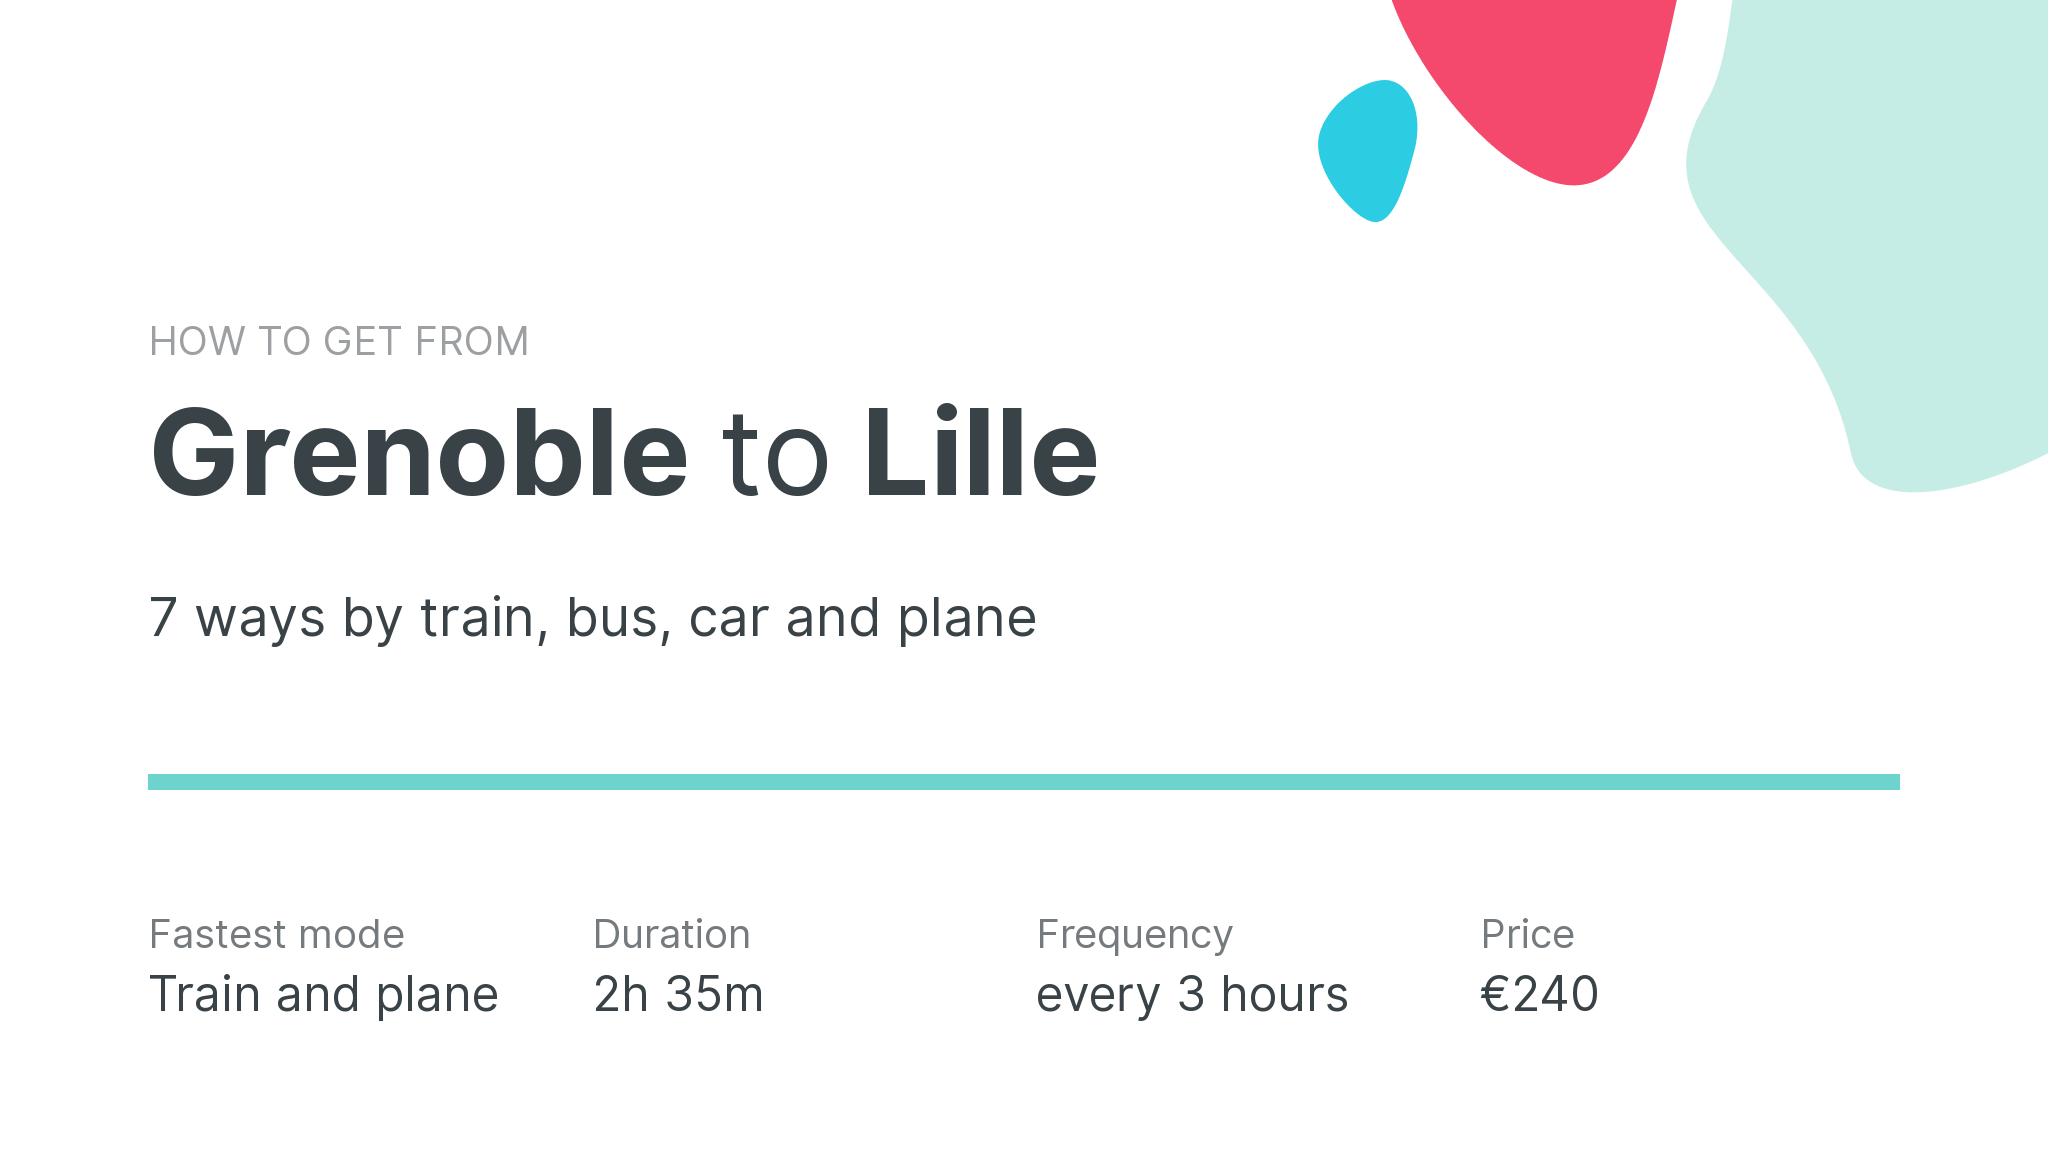 How do I get from Grenoble to Lille